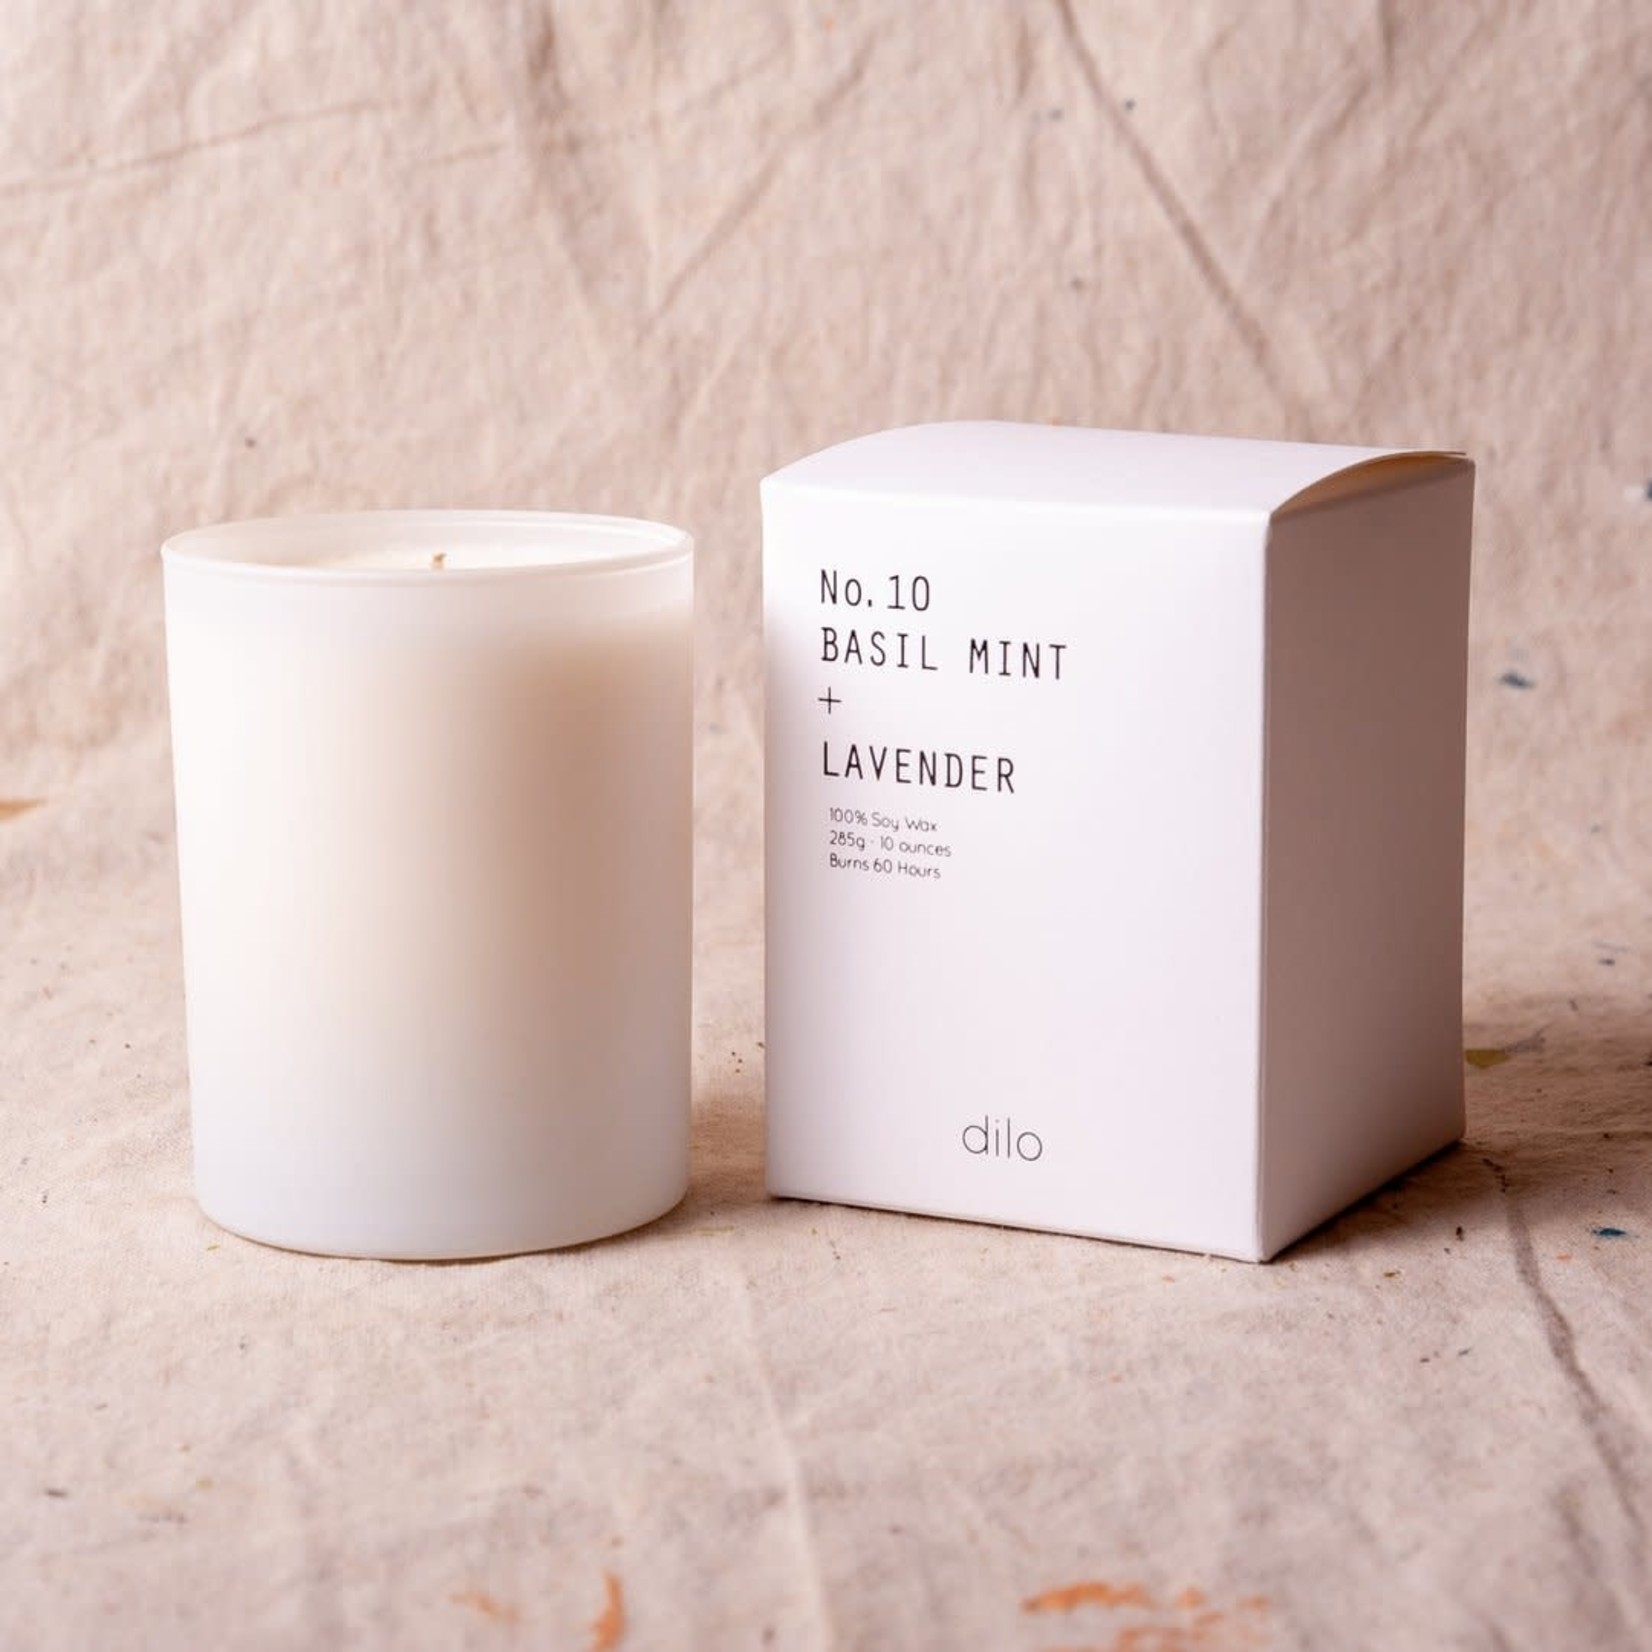 Dilo dilo Shades Basil Mint + Lavender Candle